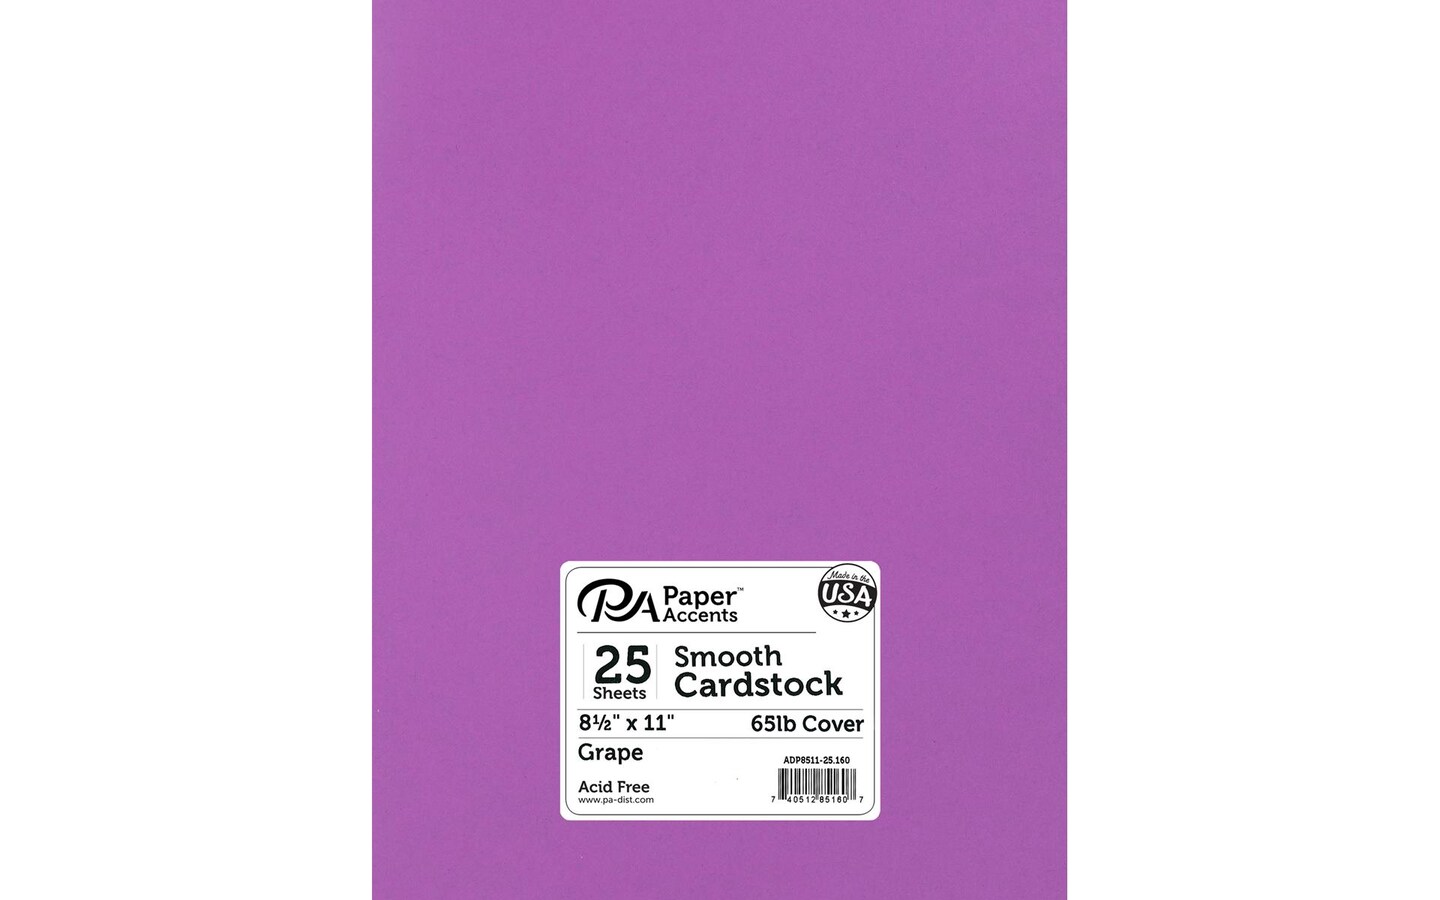 PA Paper Accents Smooth Cardstock 8.5 x 11 Grape, 65lb colored cardstock  paper for card making, scrapbooking, printing, quilling and crafts, 25  piece pack